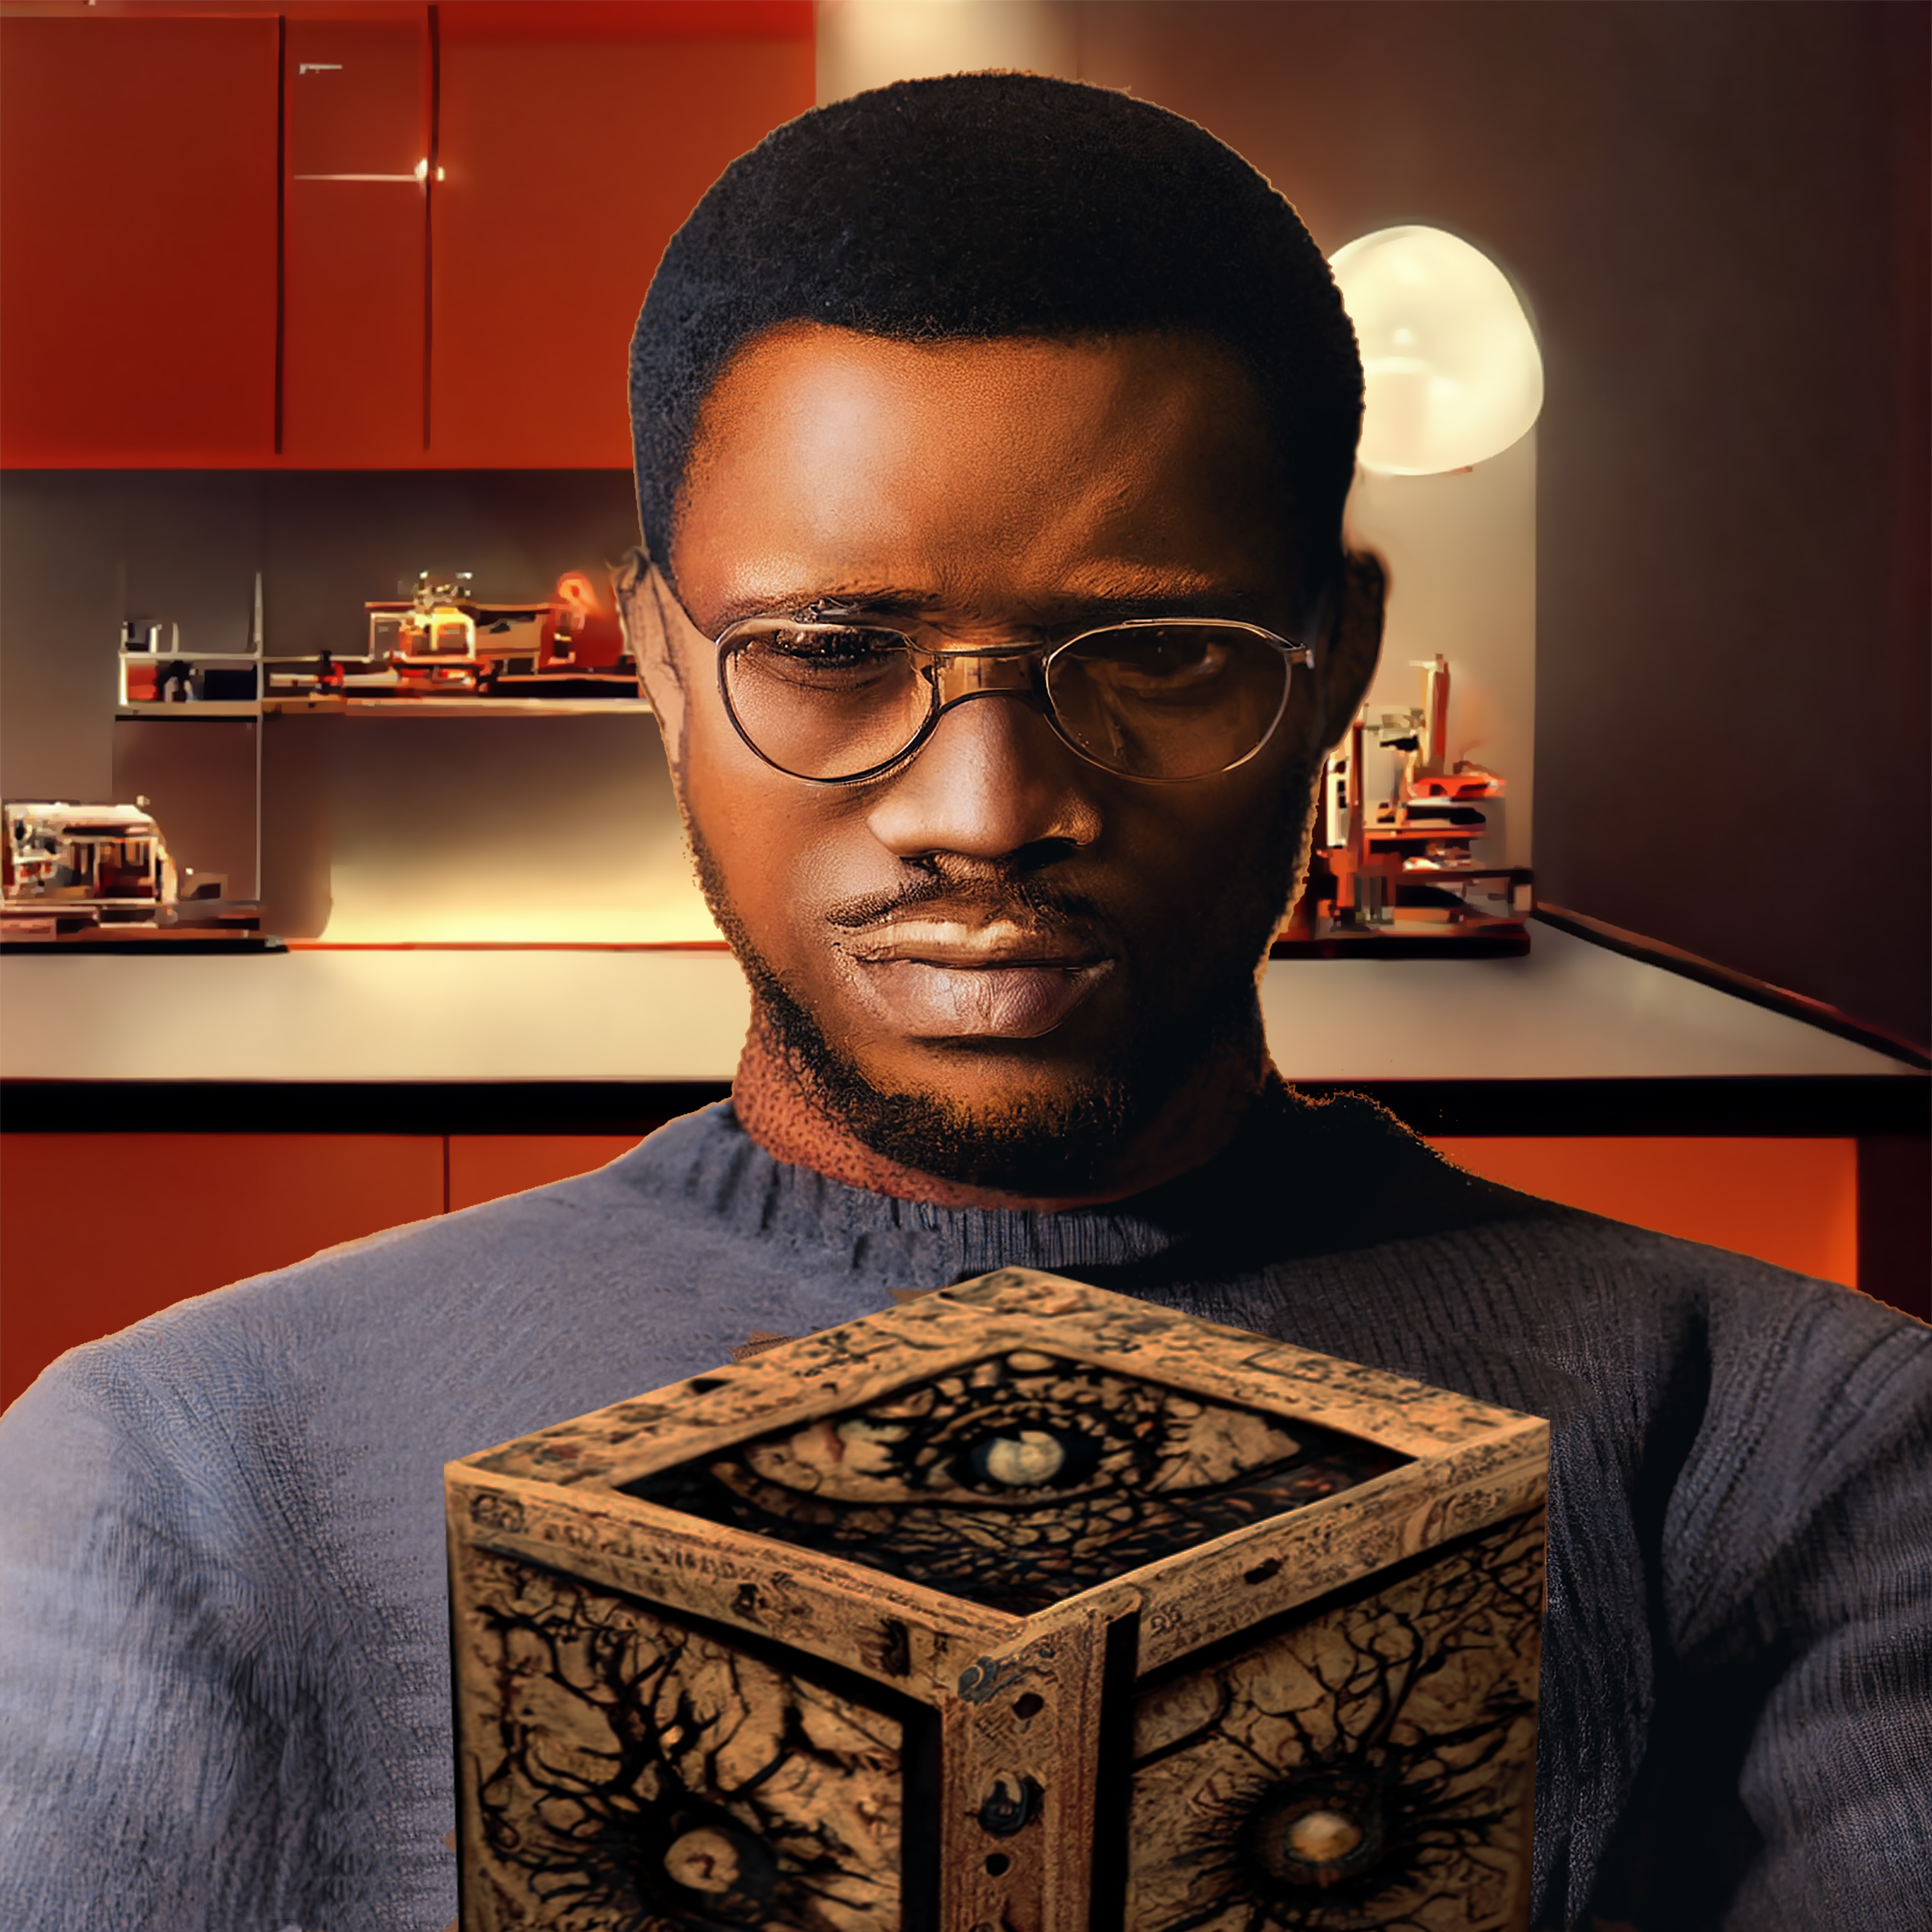 Man in kitchen staring at a wooden puzzle box.